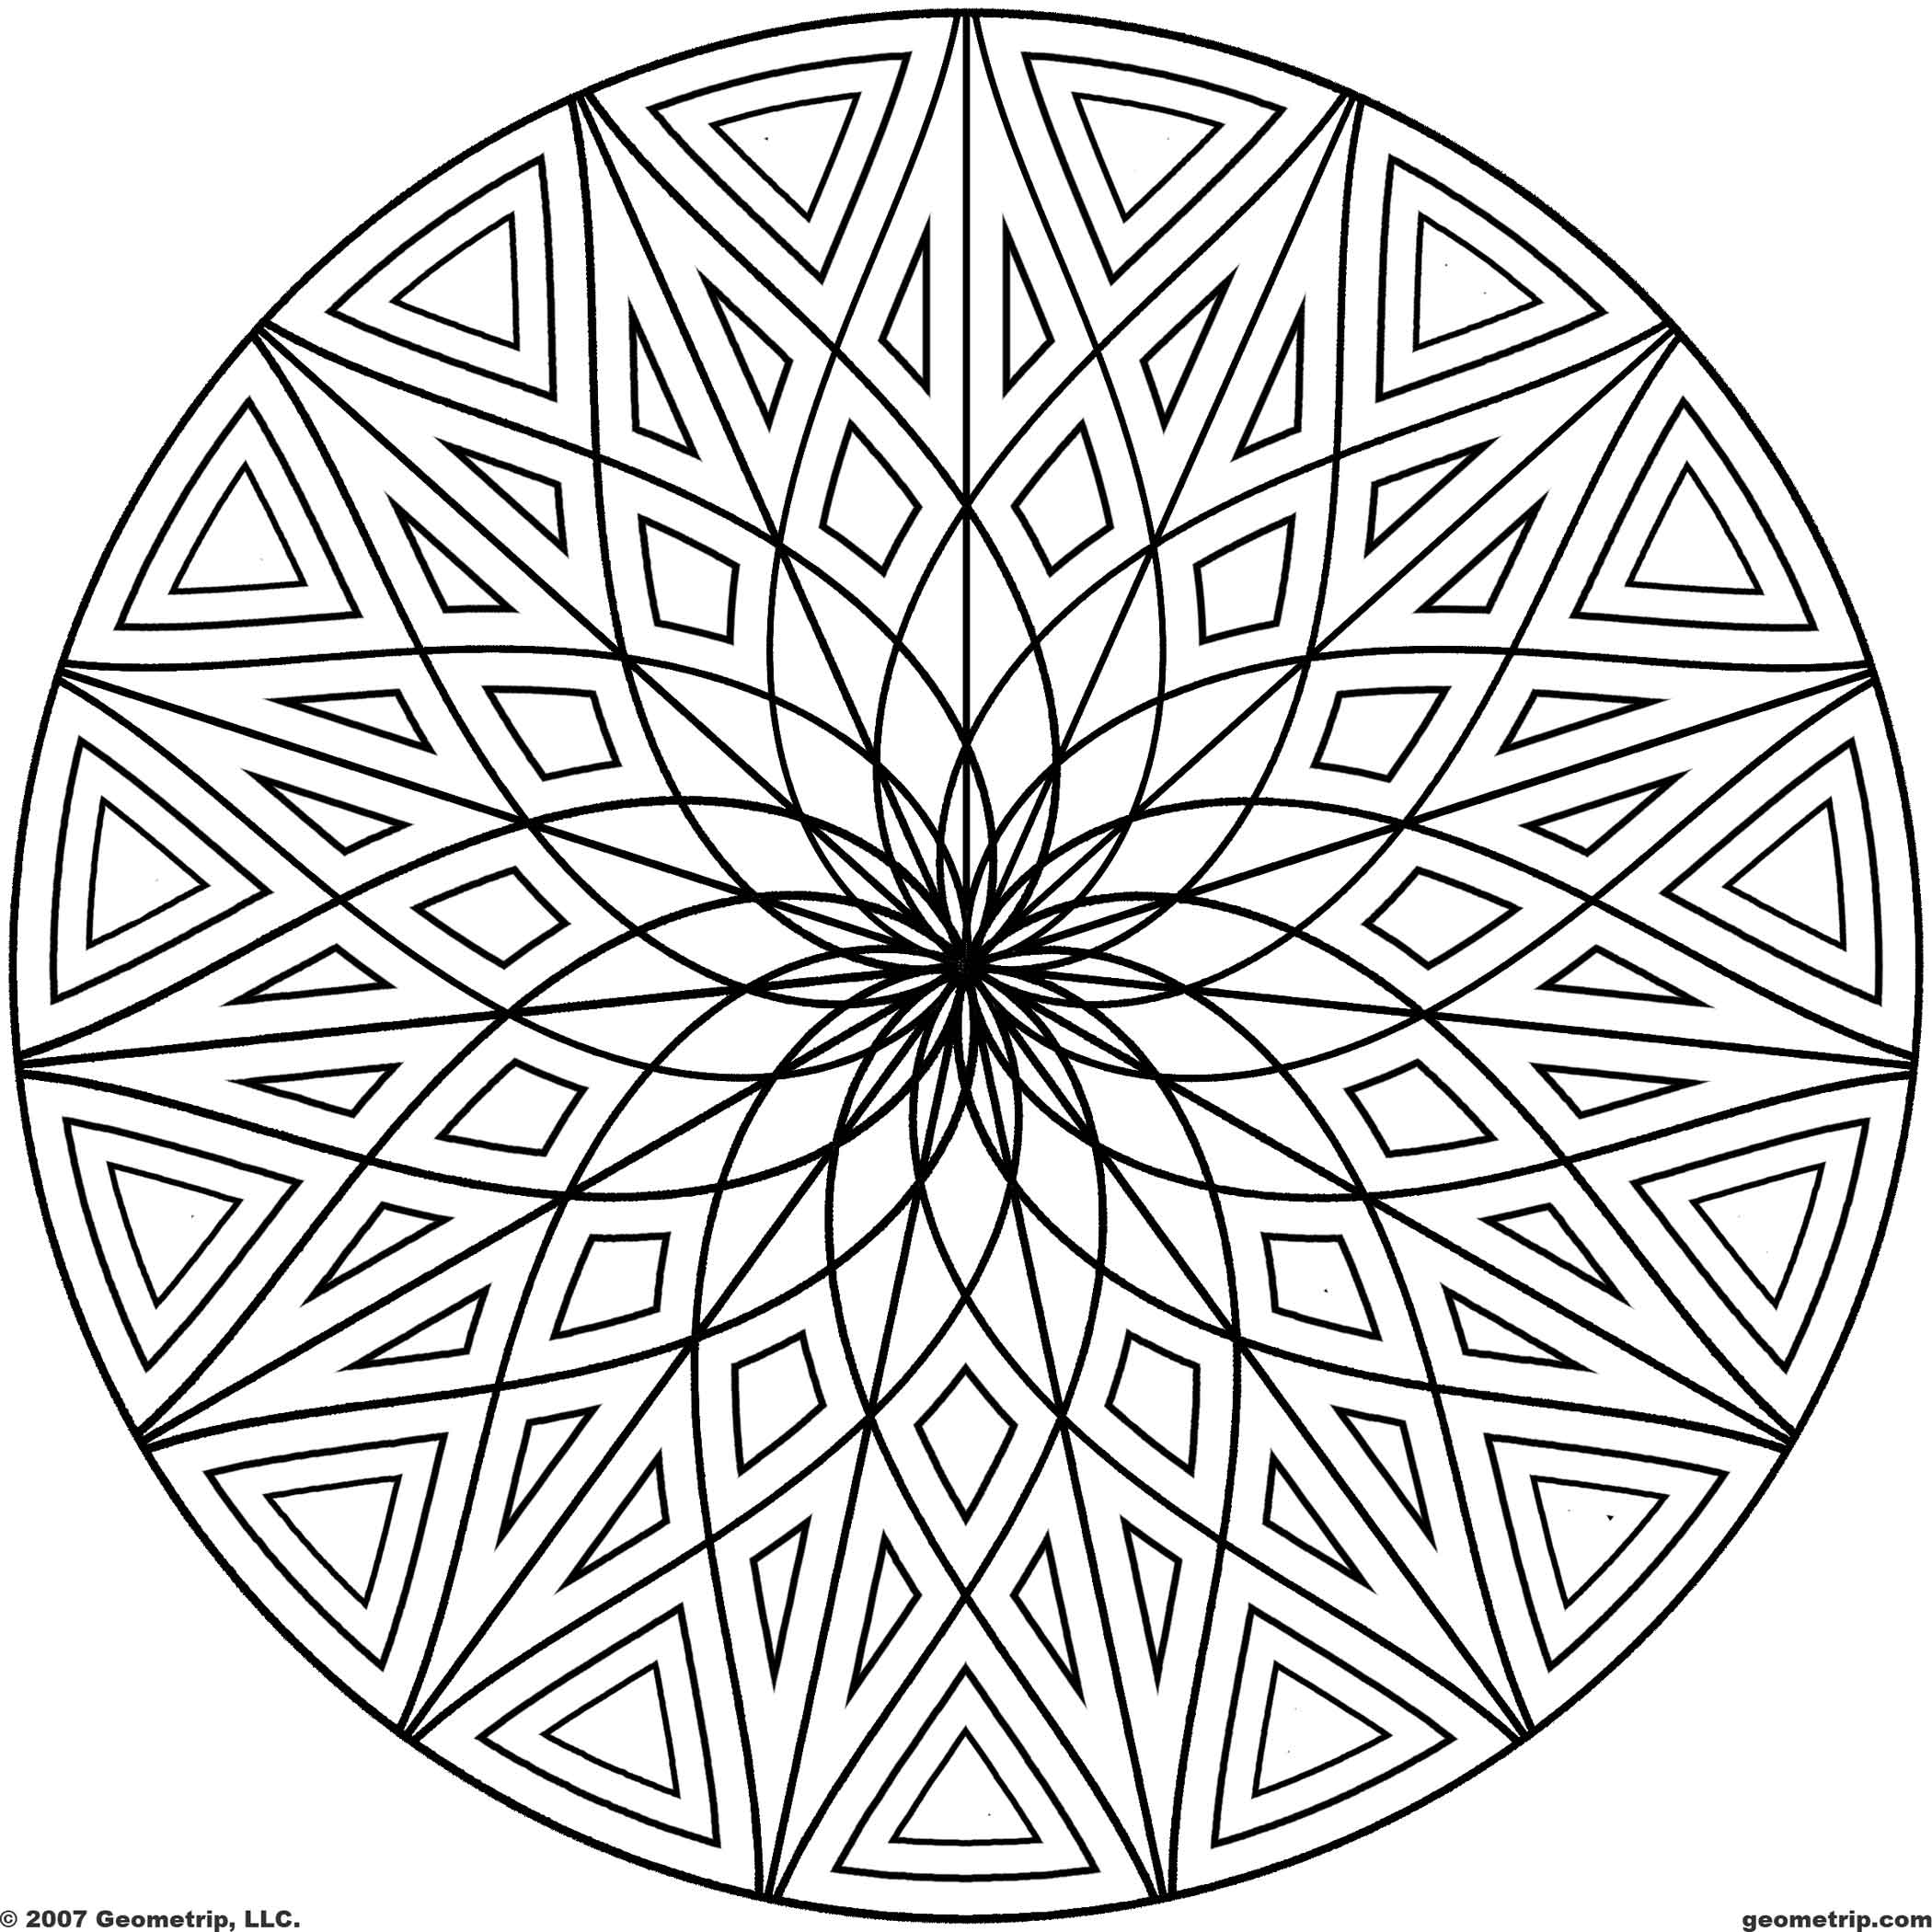 16 Cool Coloring Pages Of Designs Images - Cool Geometric Designs